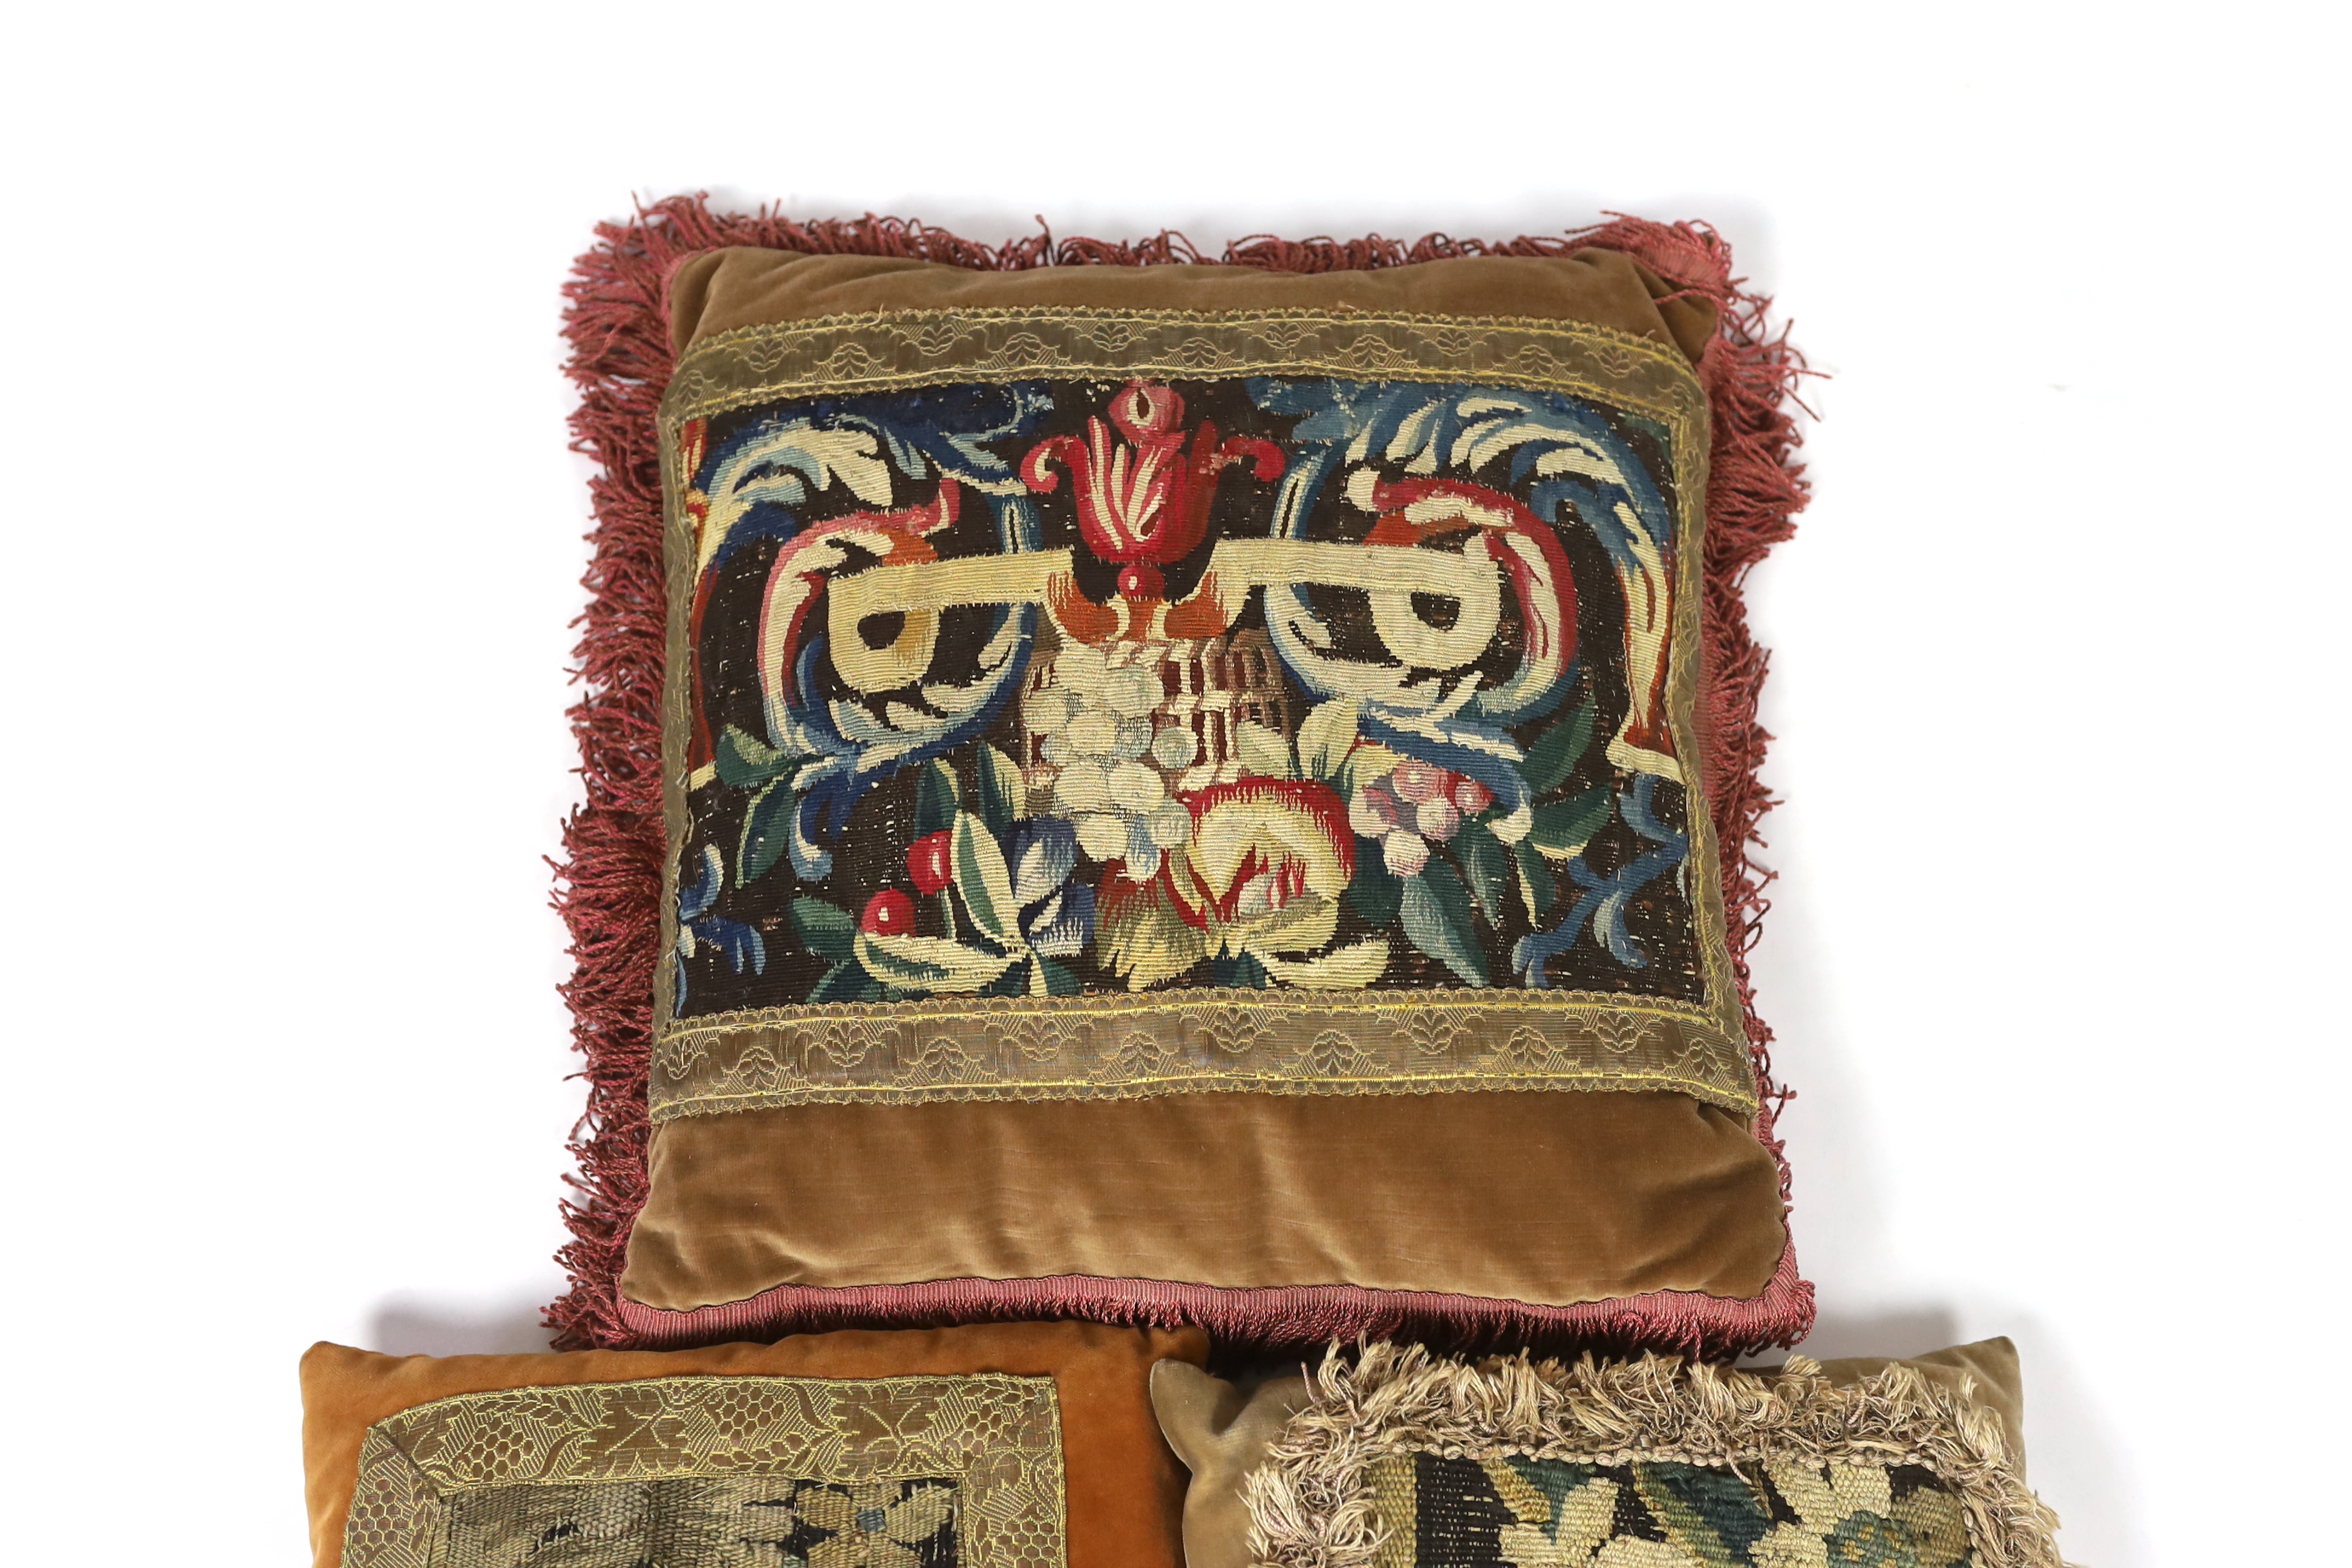 Two late 18th century Flemish verdure tapestry fragments made into cushions, plus a 19th century French Aubusson and an early 19th century Italian burgundy cut velvet damask panel, both made into cushions, all trimmed wi